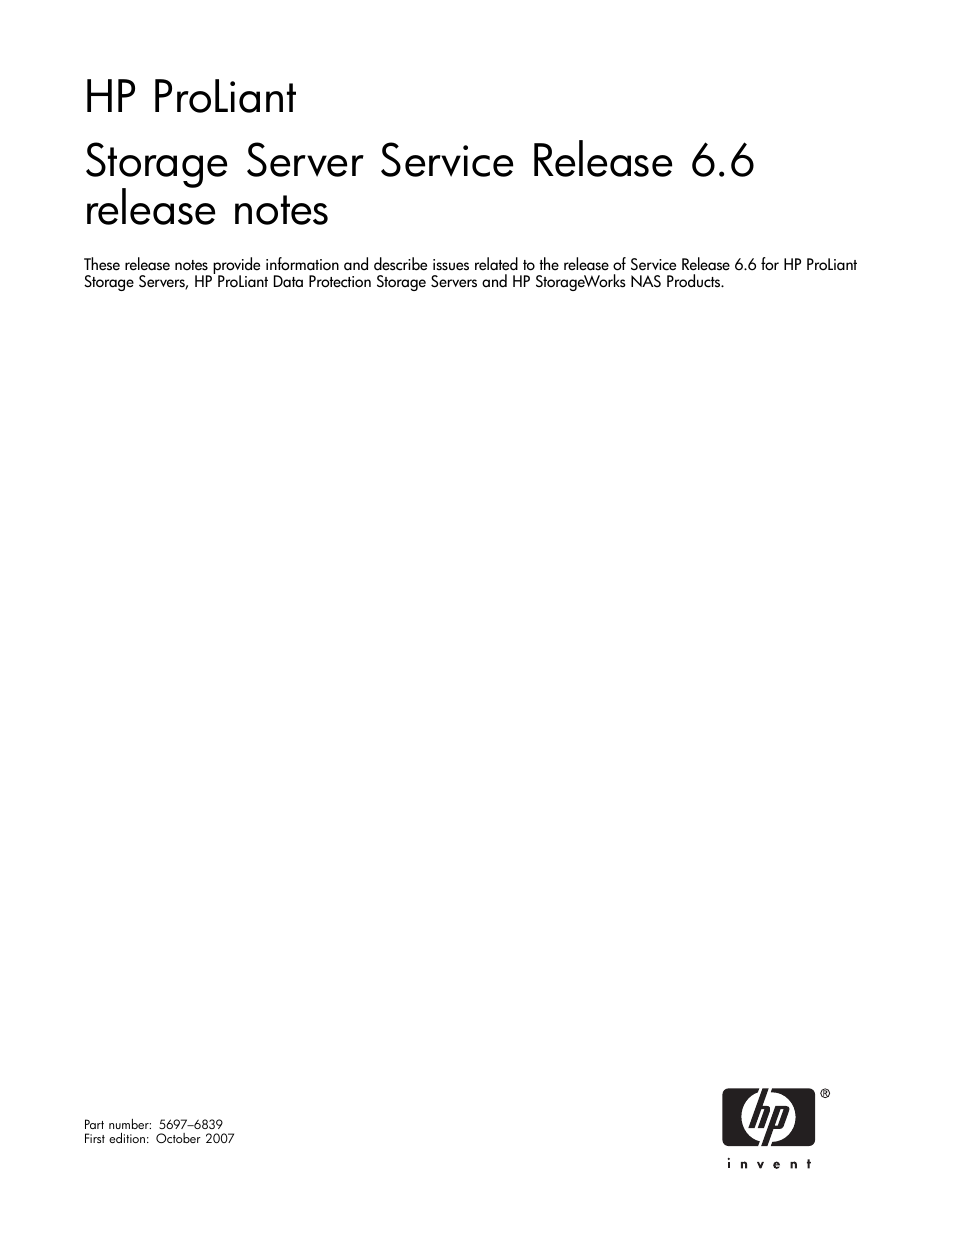 HP PROLIANT 56976839 User Manual | 16 pages